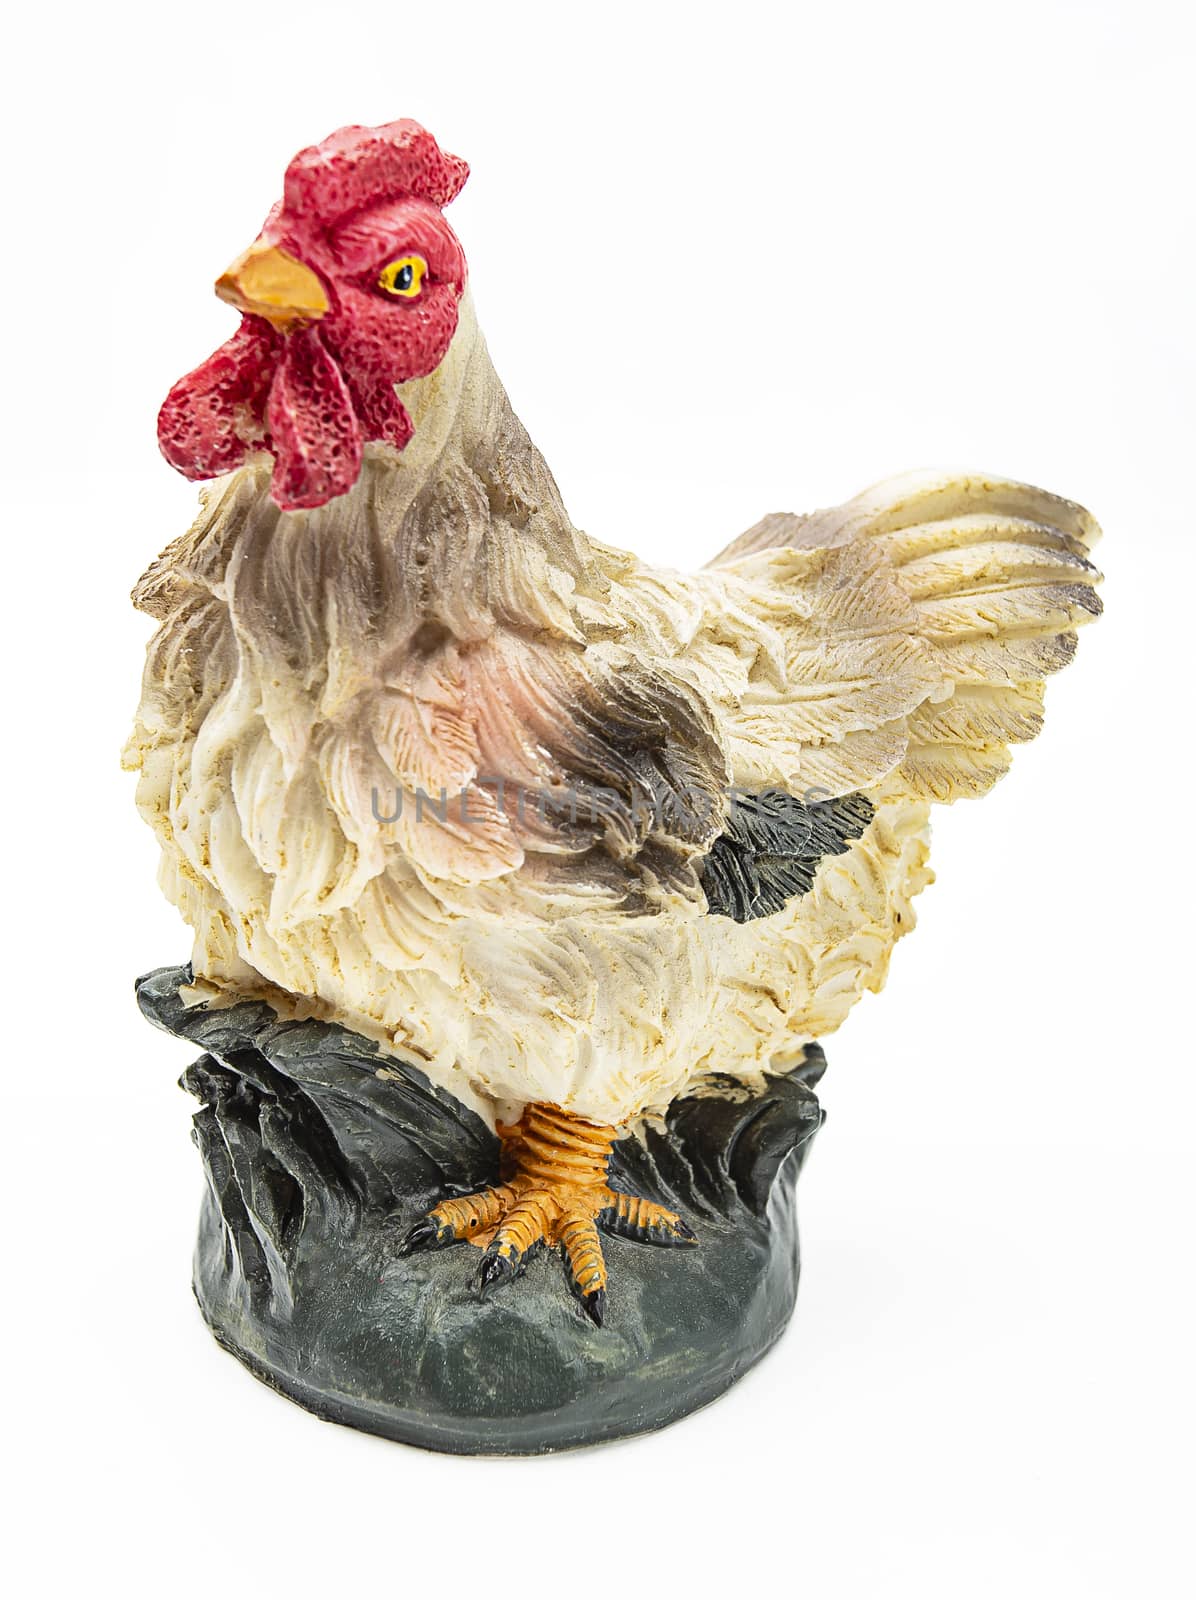 Isolated chicken figurine on a white background